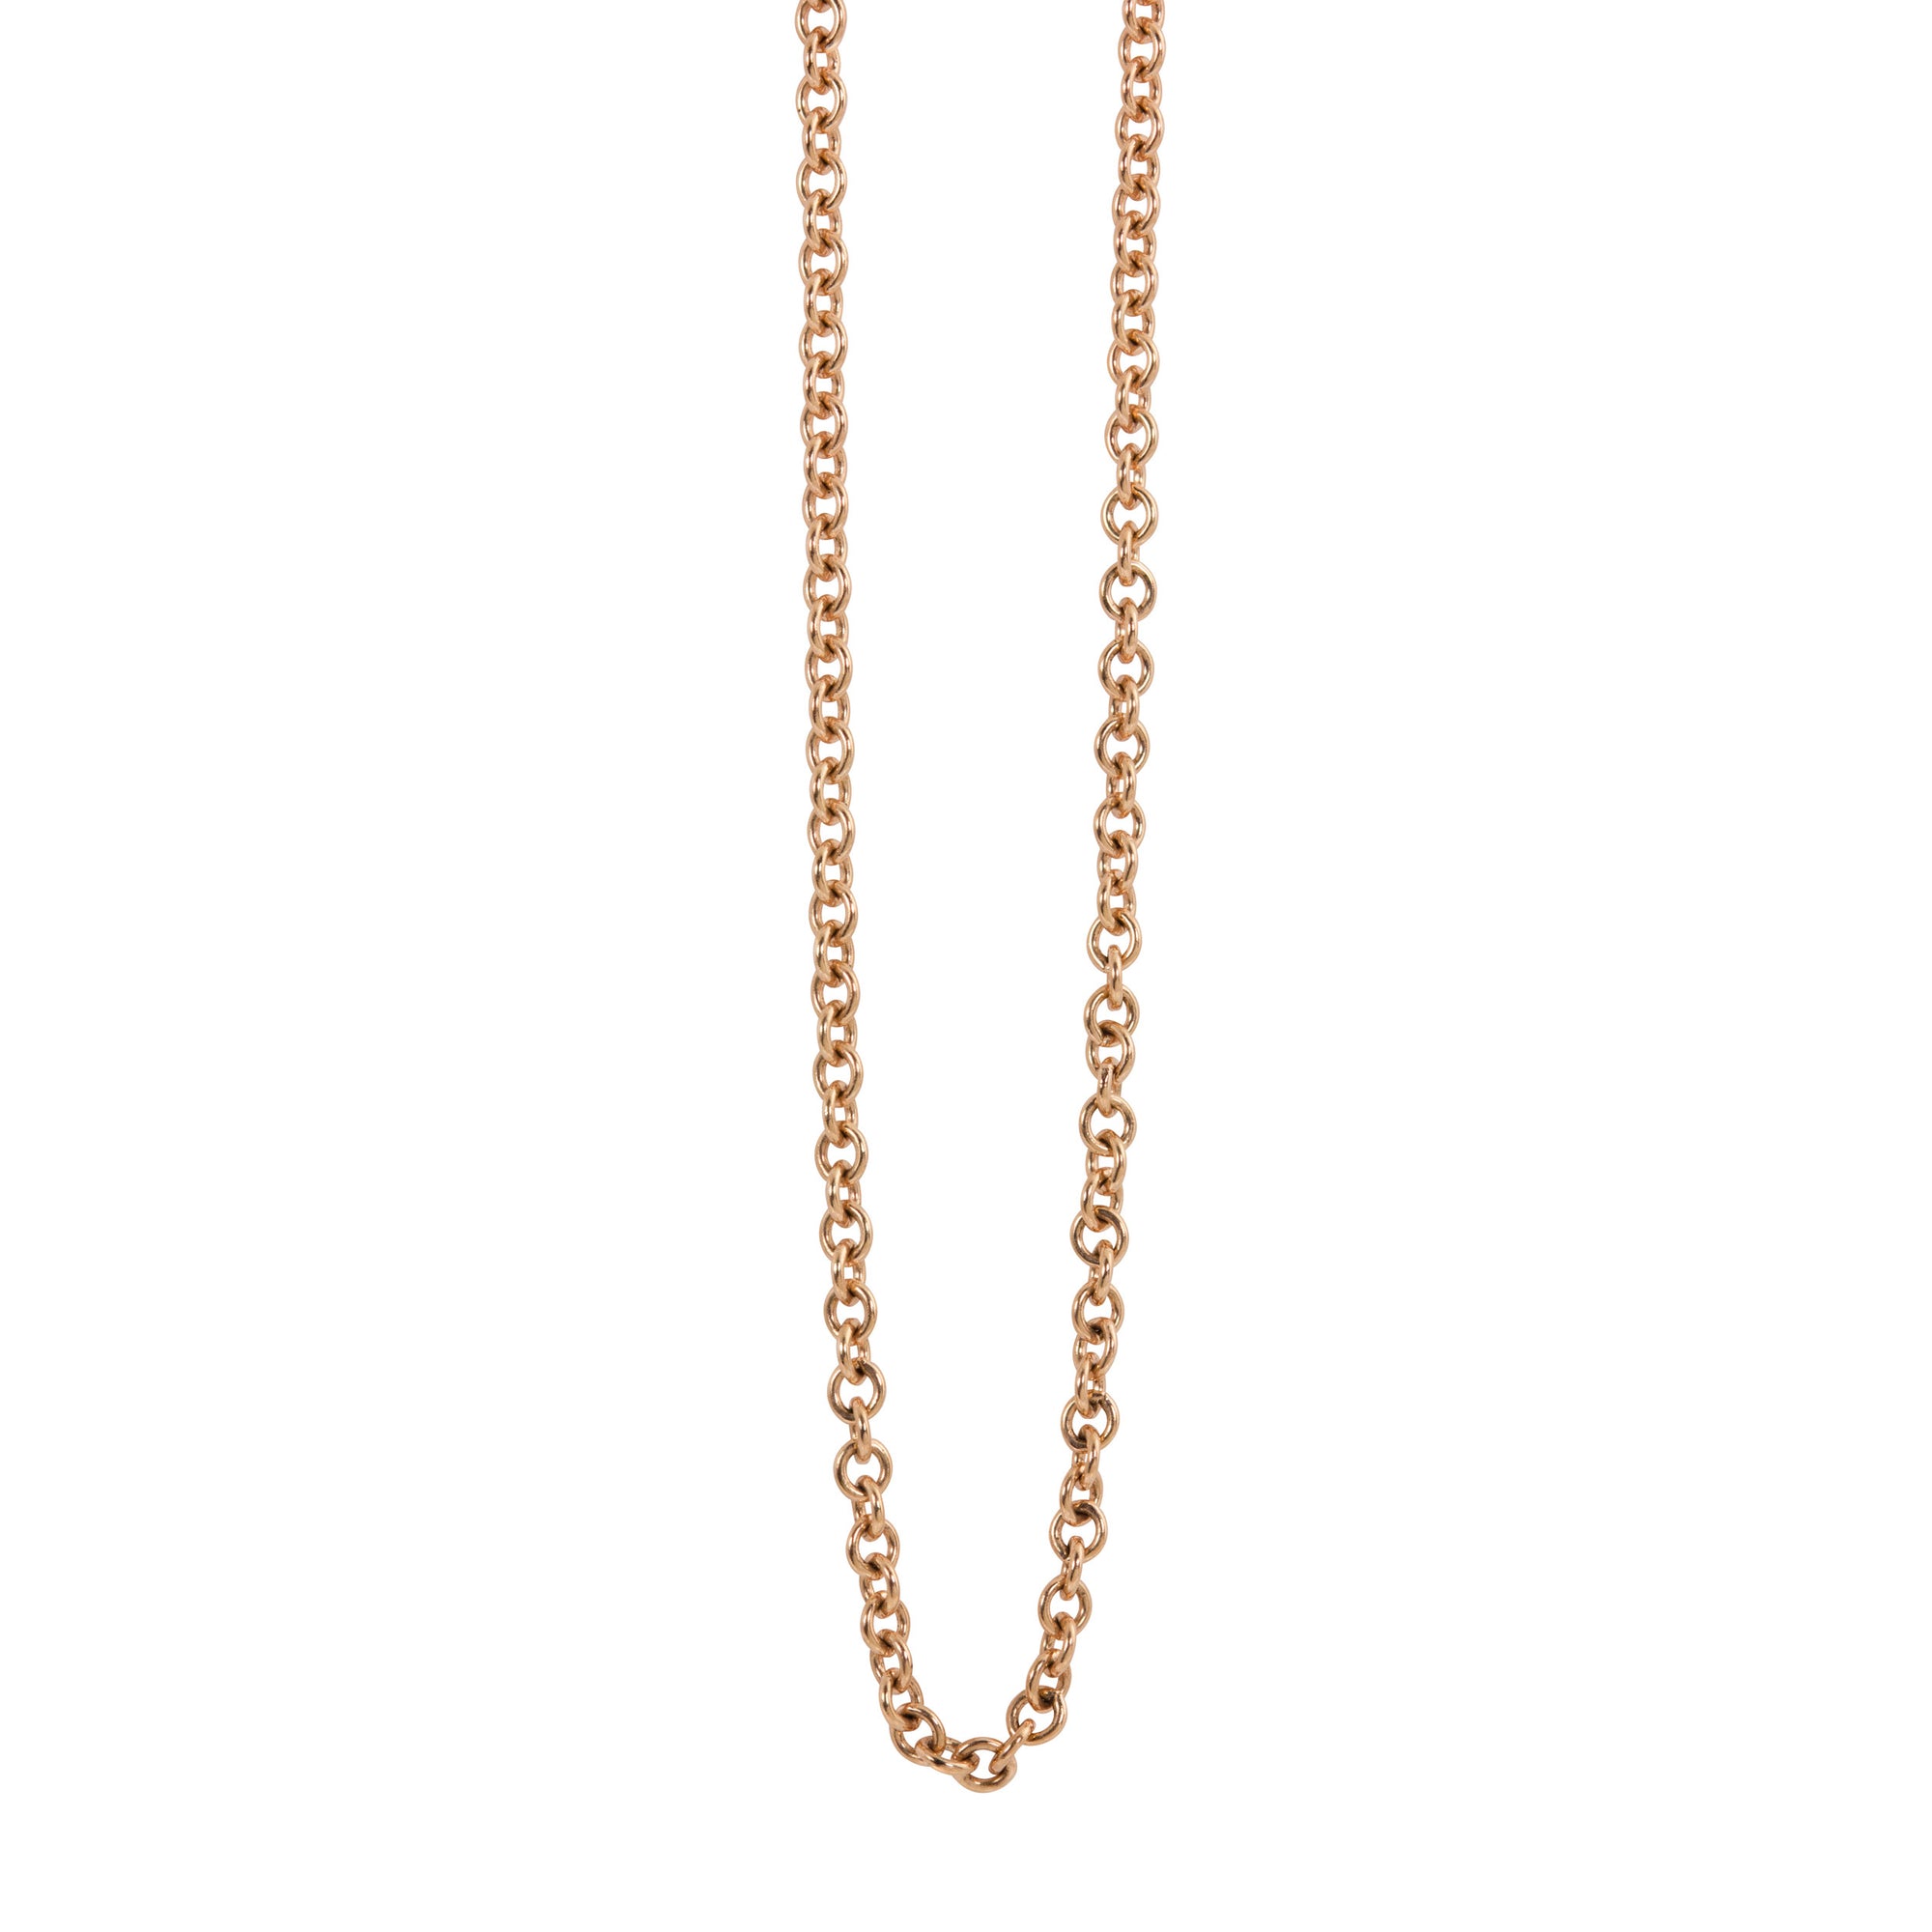 14k rose gold 2.0mm rolo link chain